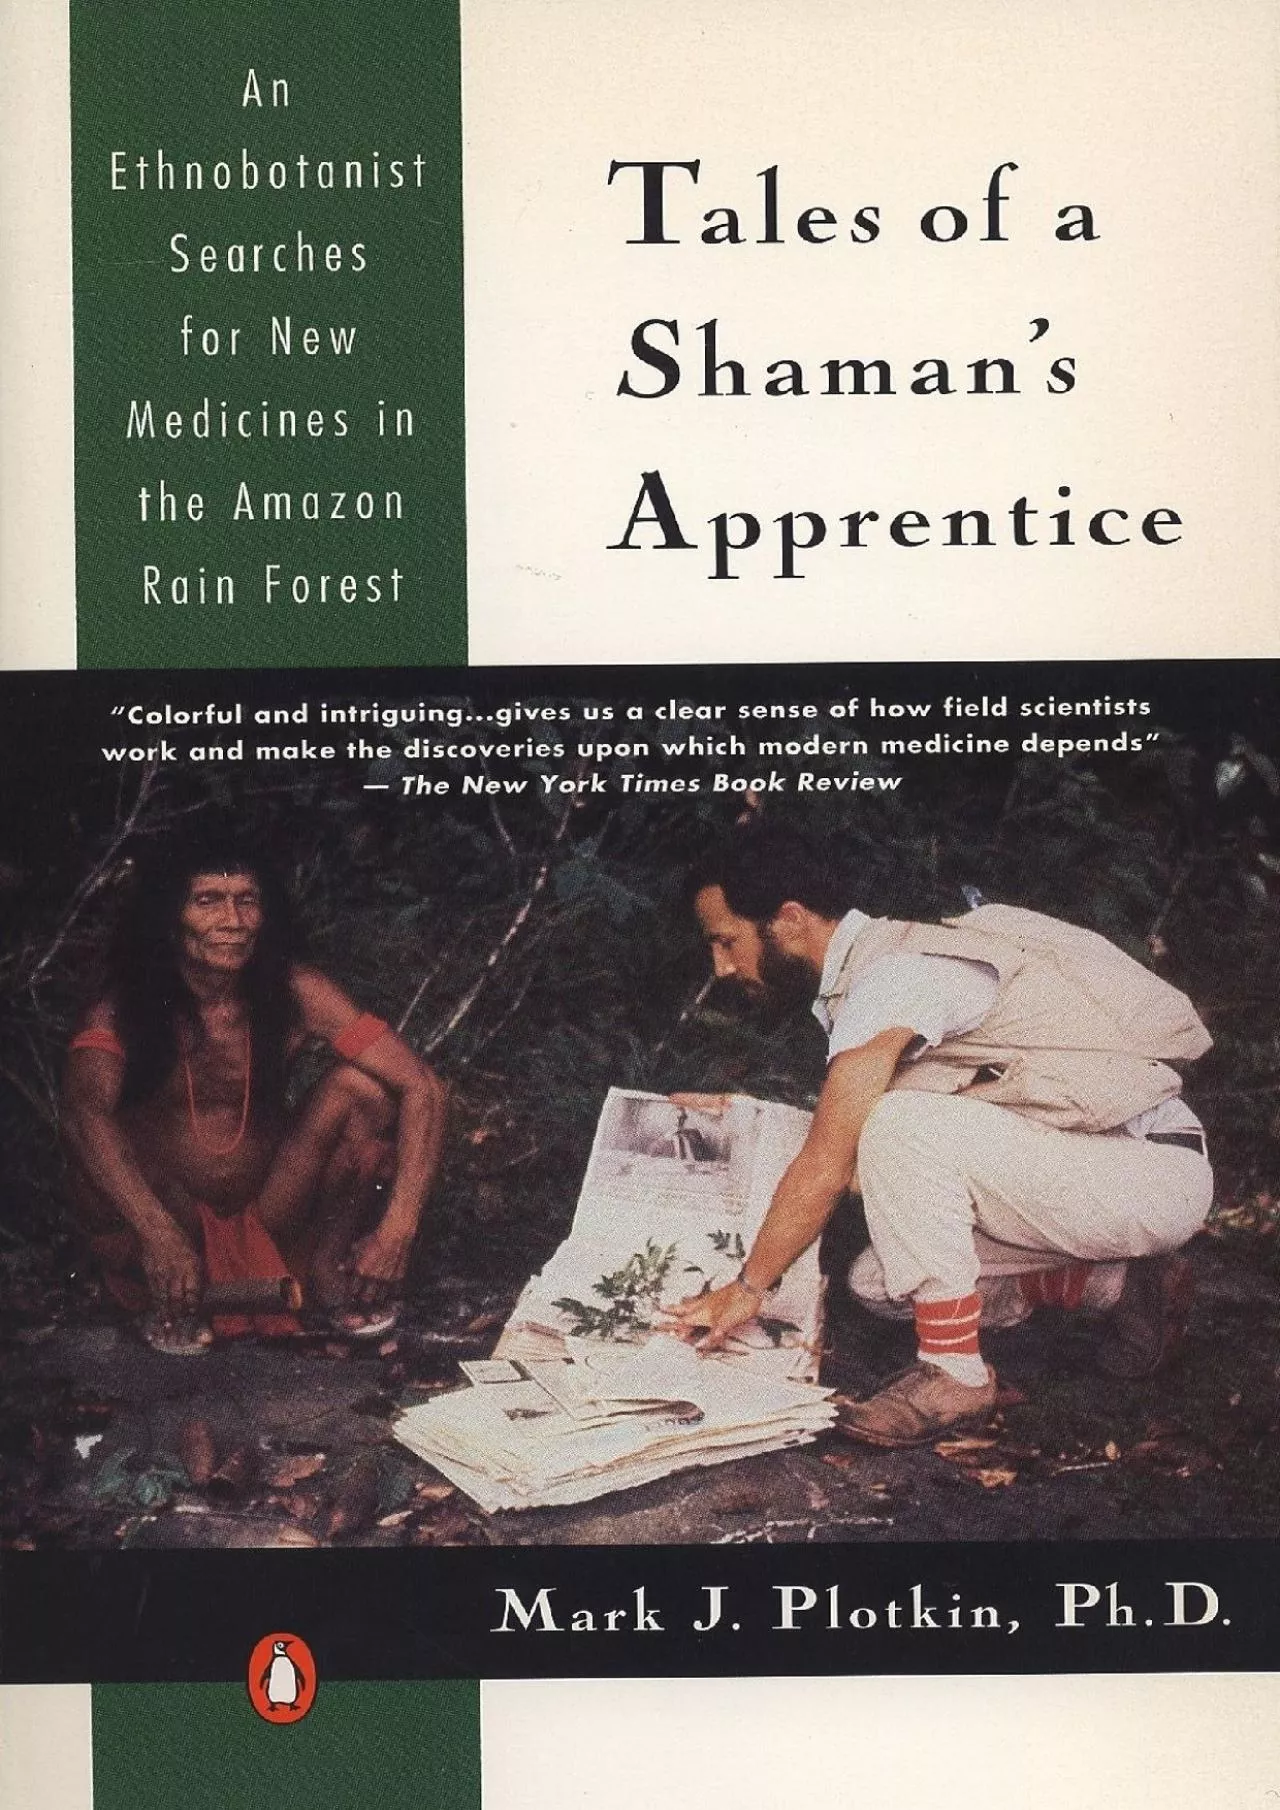 (EBOOK)-Tales of a Shaman\'s Apprentice: An Ethnobotanist Searches for New Medicines in